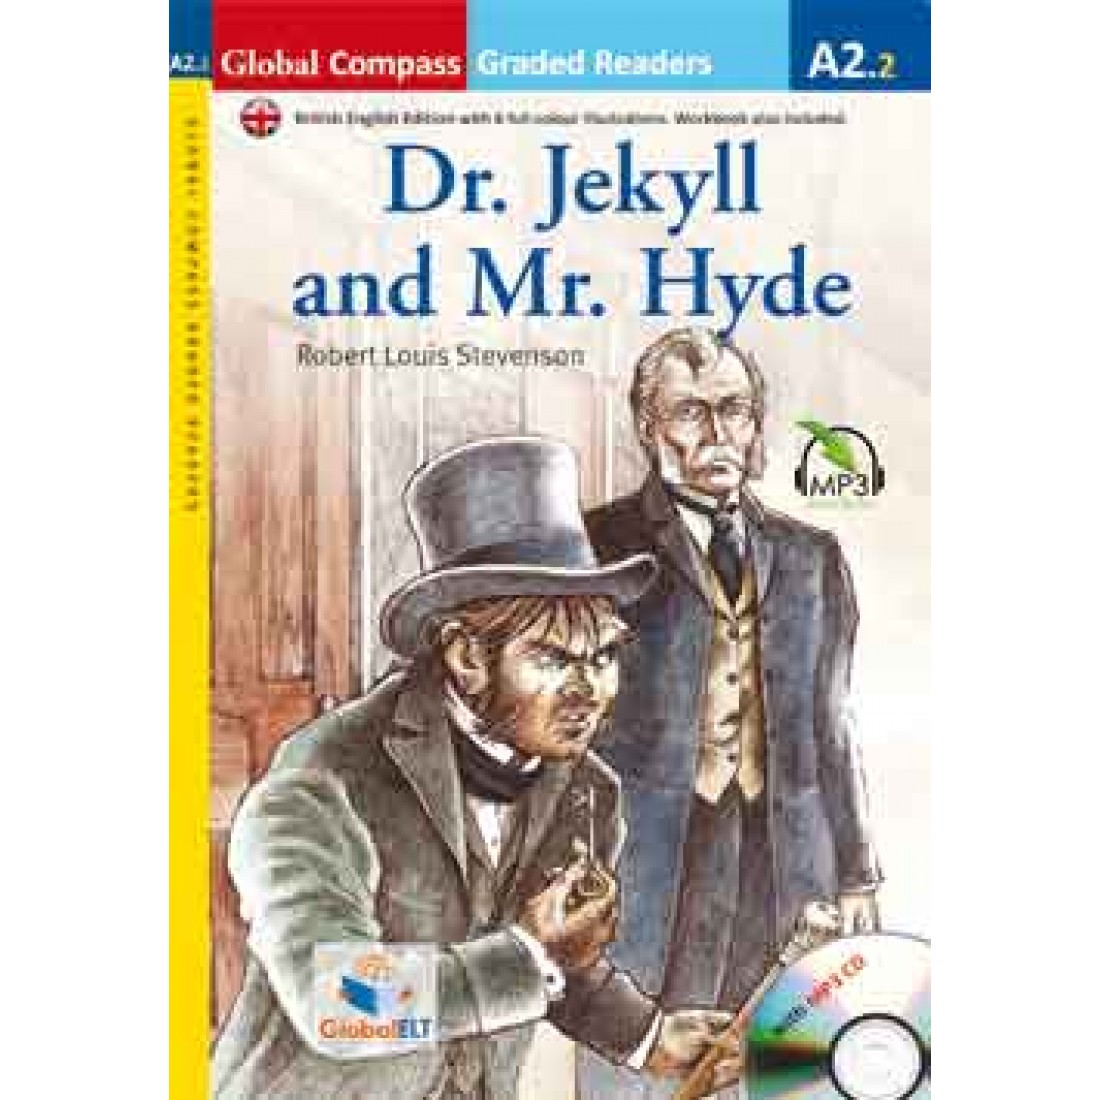 GCGR : A2.2 DR JEKYLL AND MR HYDE ( + MP3 Pack)